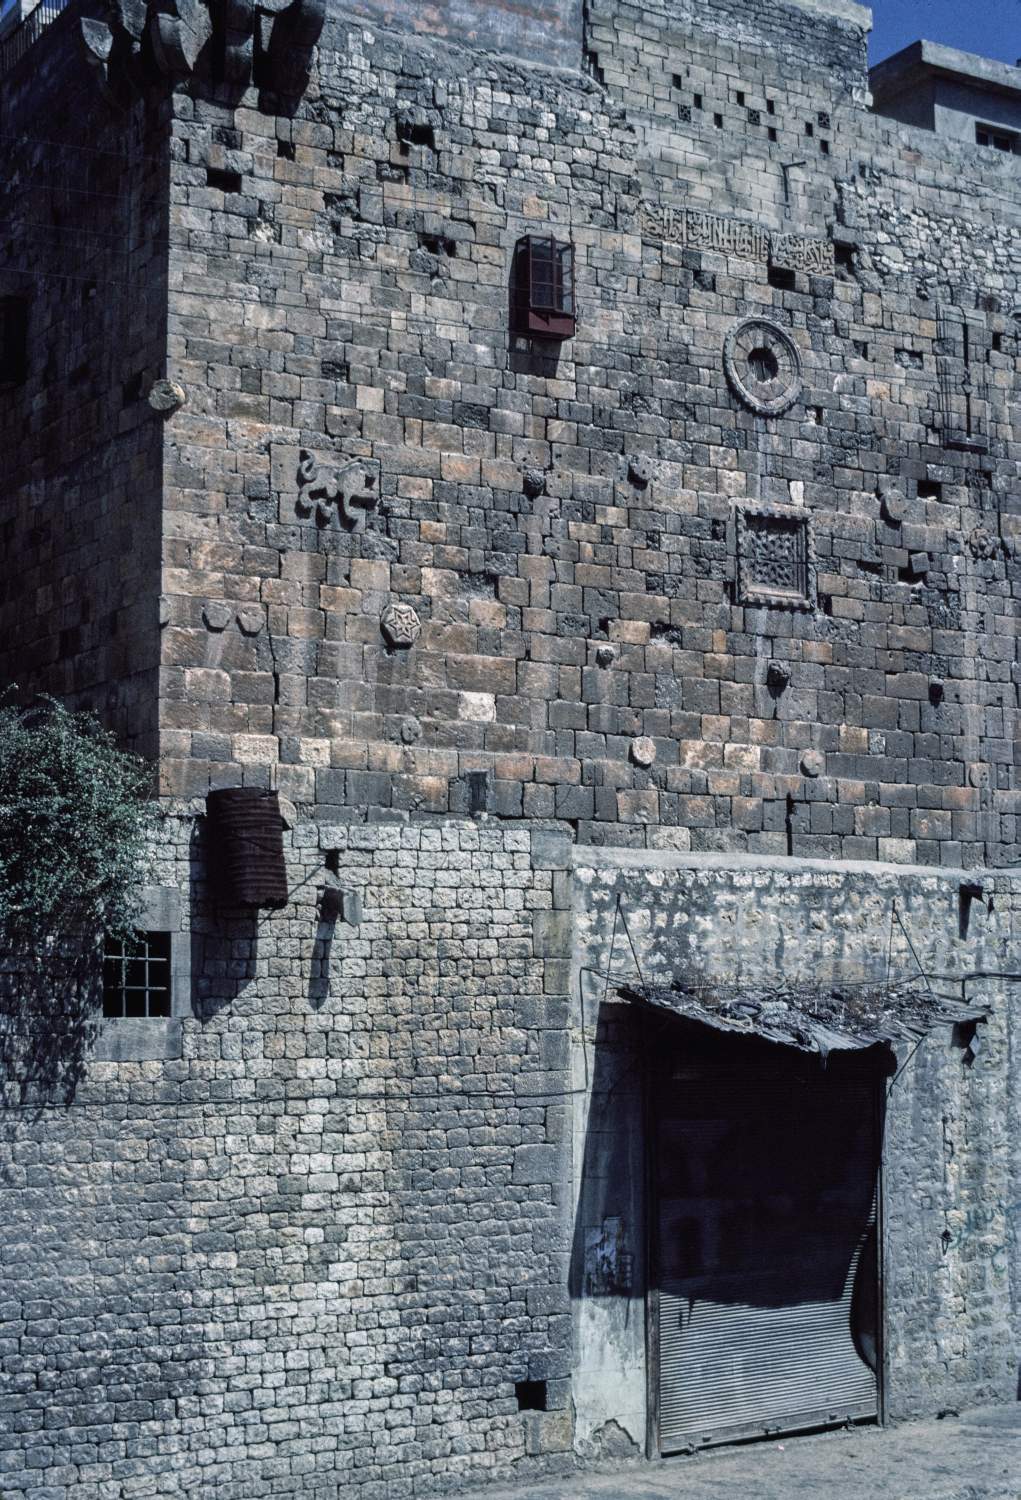 Bastion on west front north of Bab Antakiyya incorporating an inscription band and carved plaques, including a rampant lion.